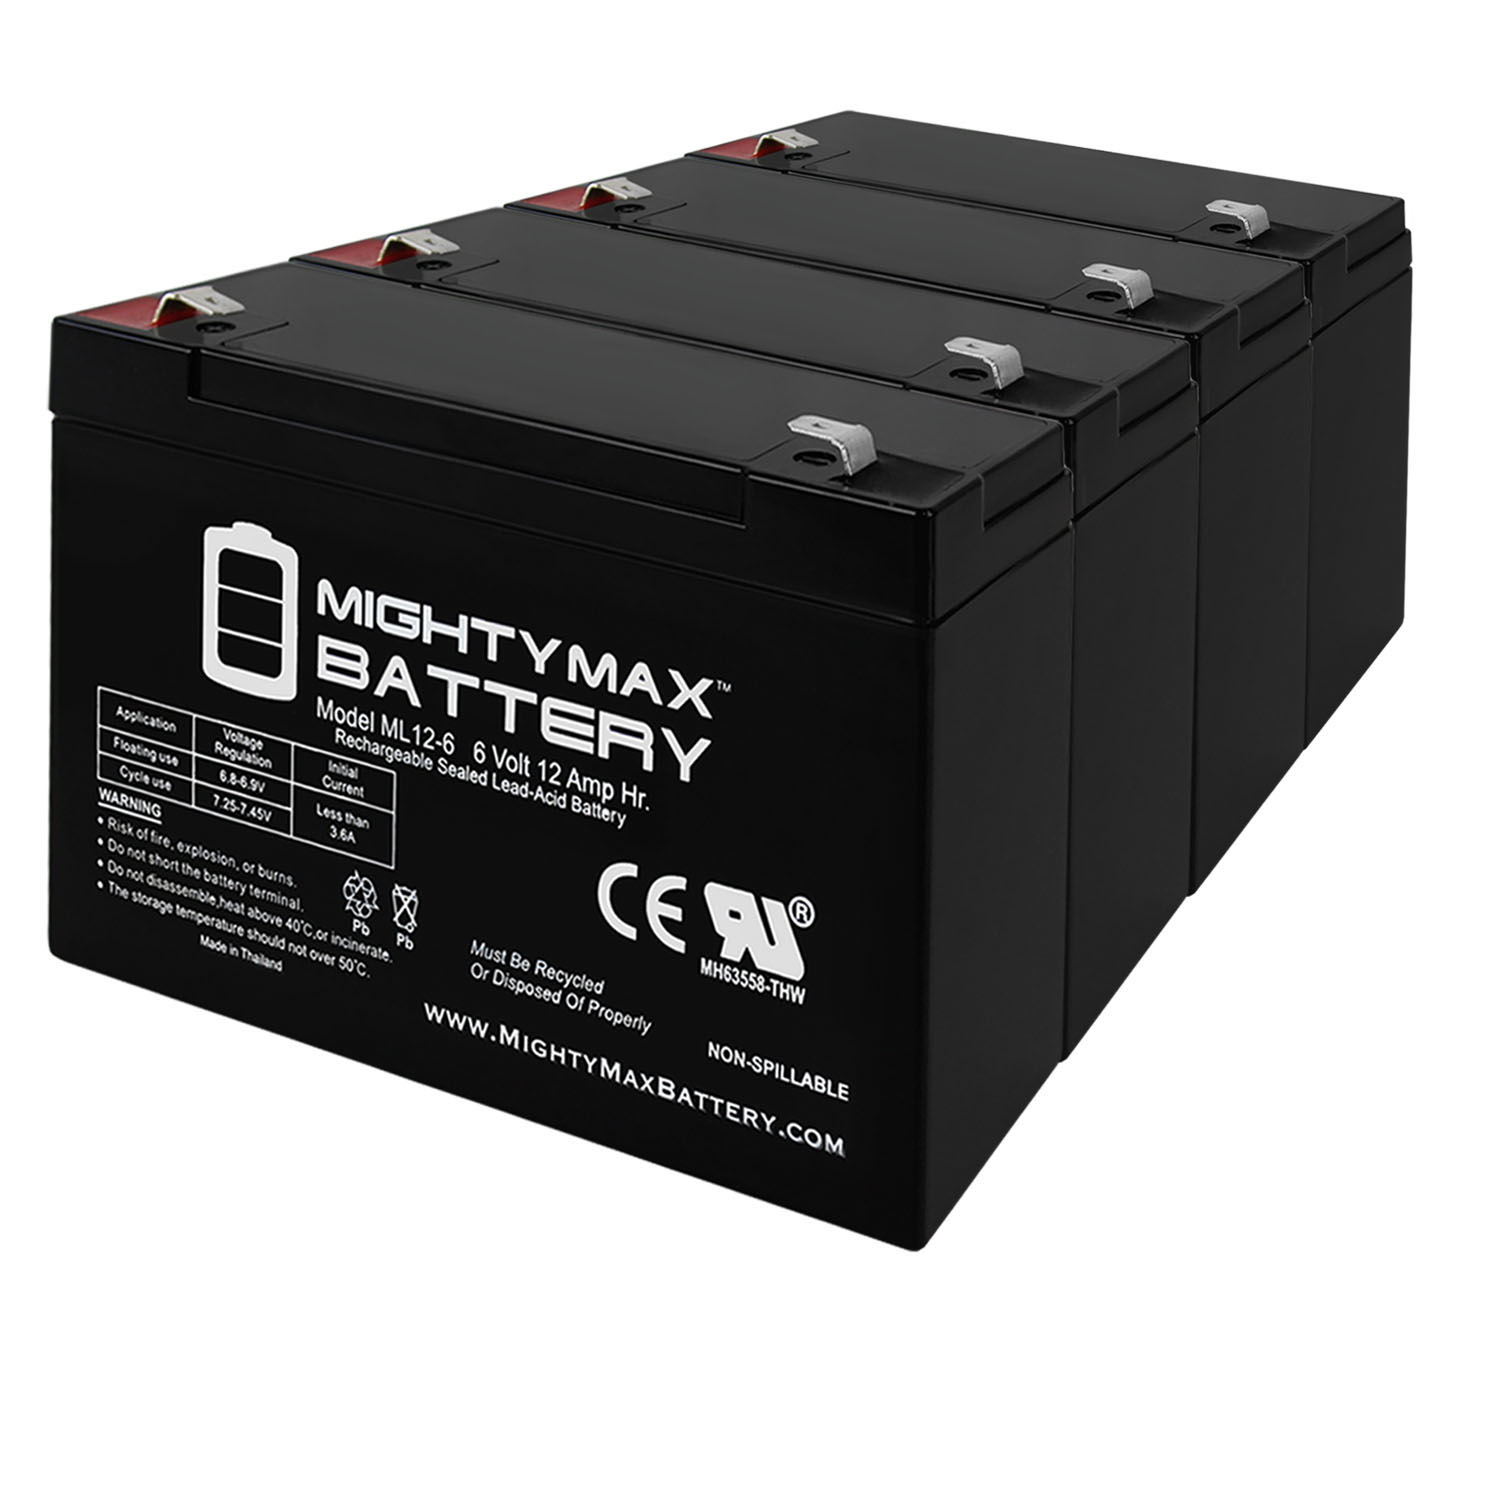 6V 12AH F2 SLA Battery Replaces Toy Car Play Mobile Scooter - 4 Pack